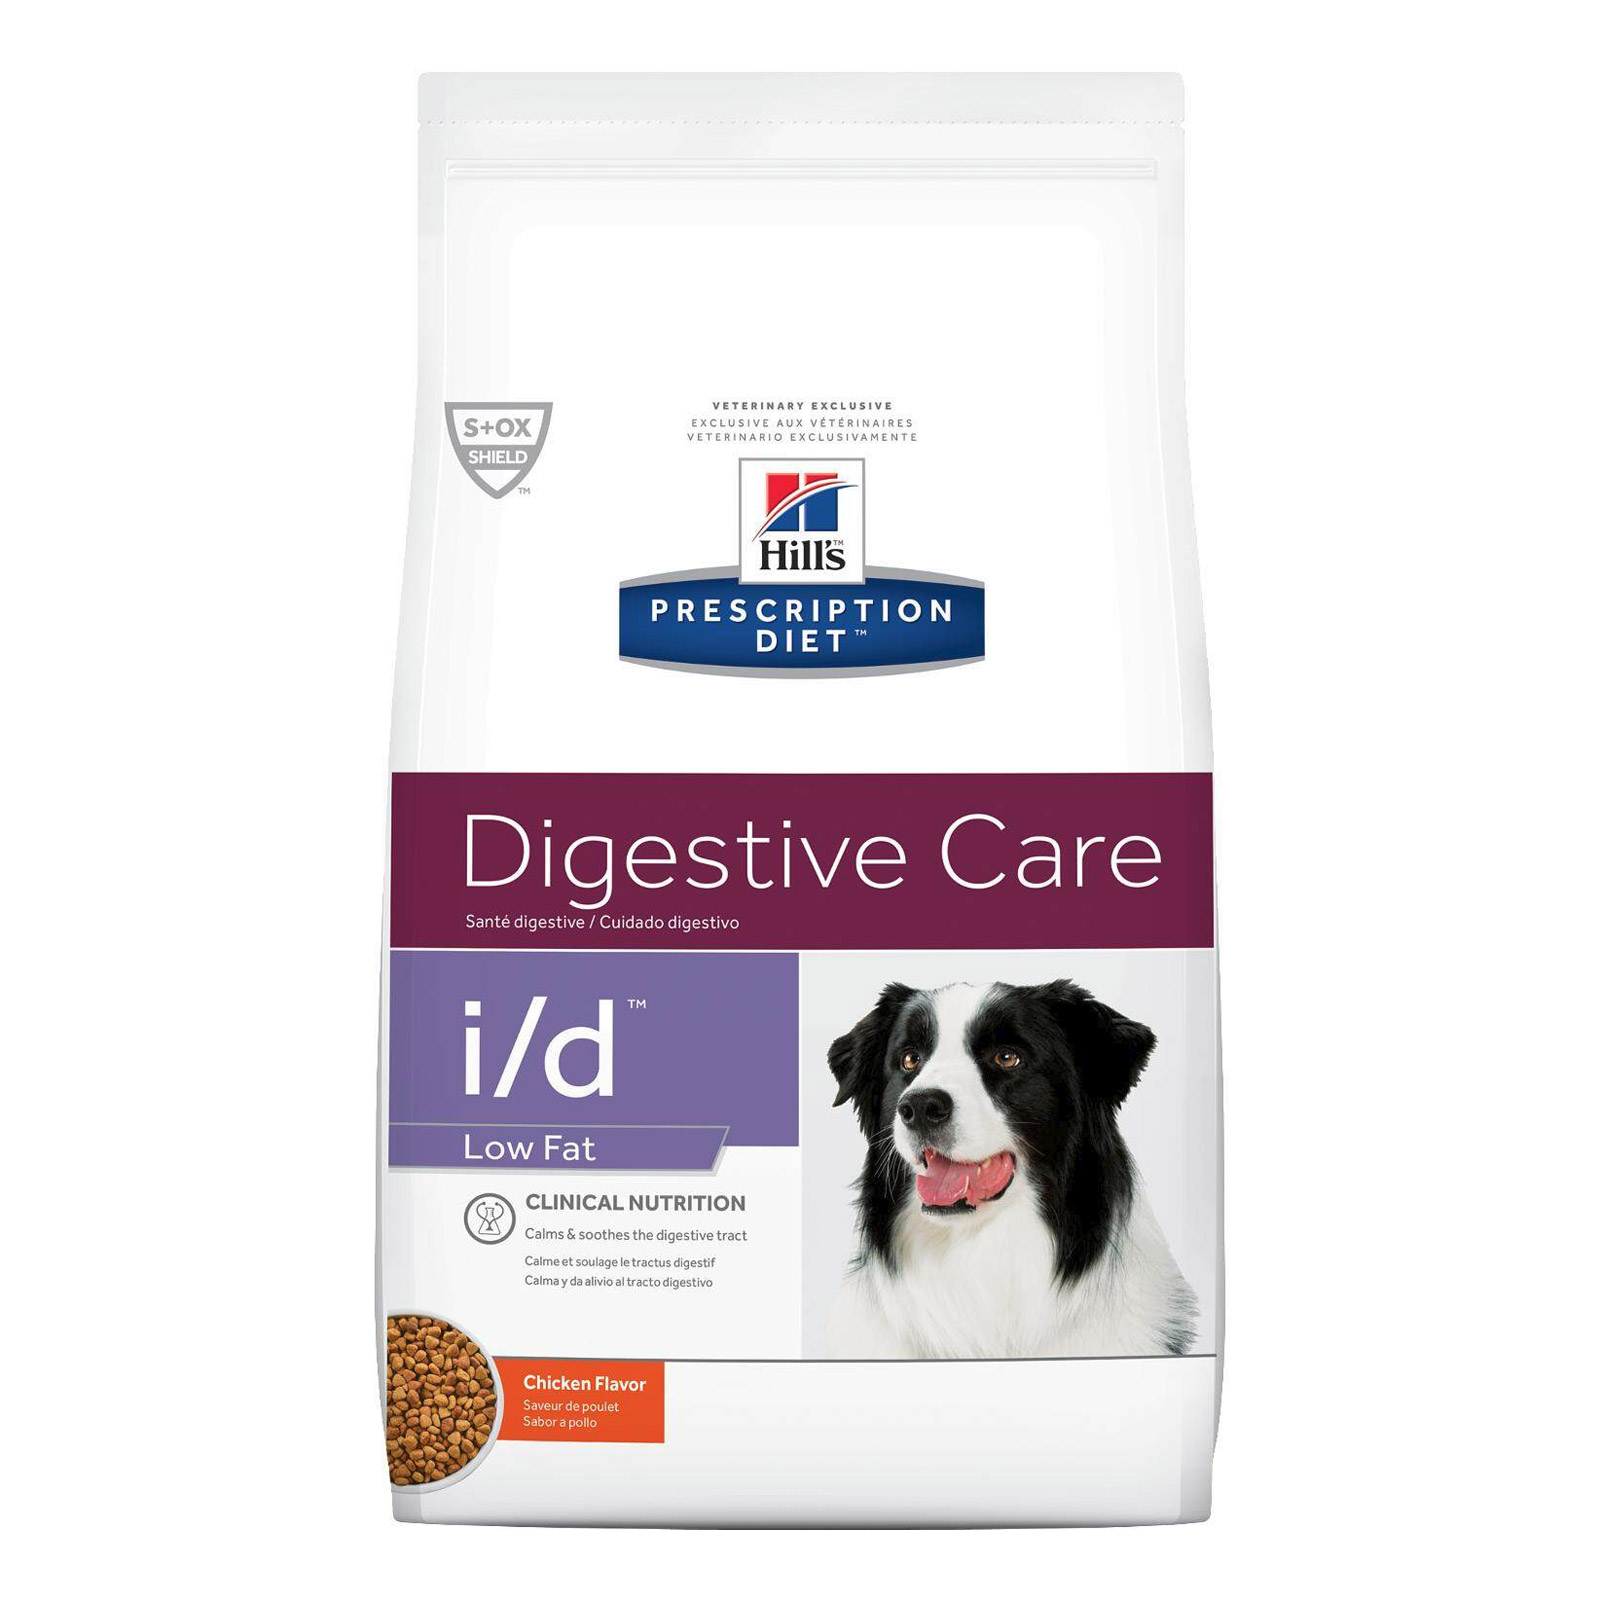 Hill's Prescription Diet i/d Low Fat Canine for Food